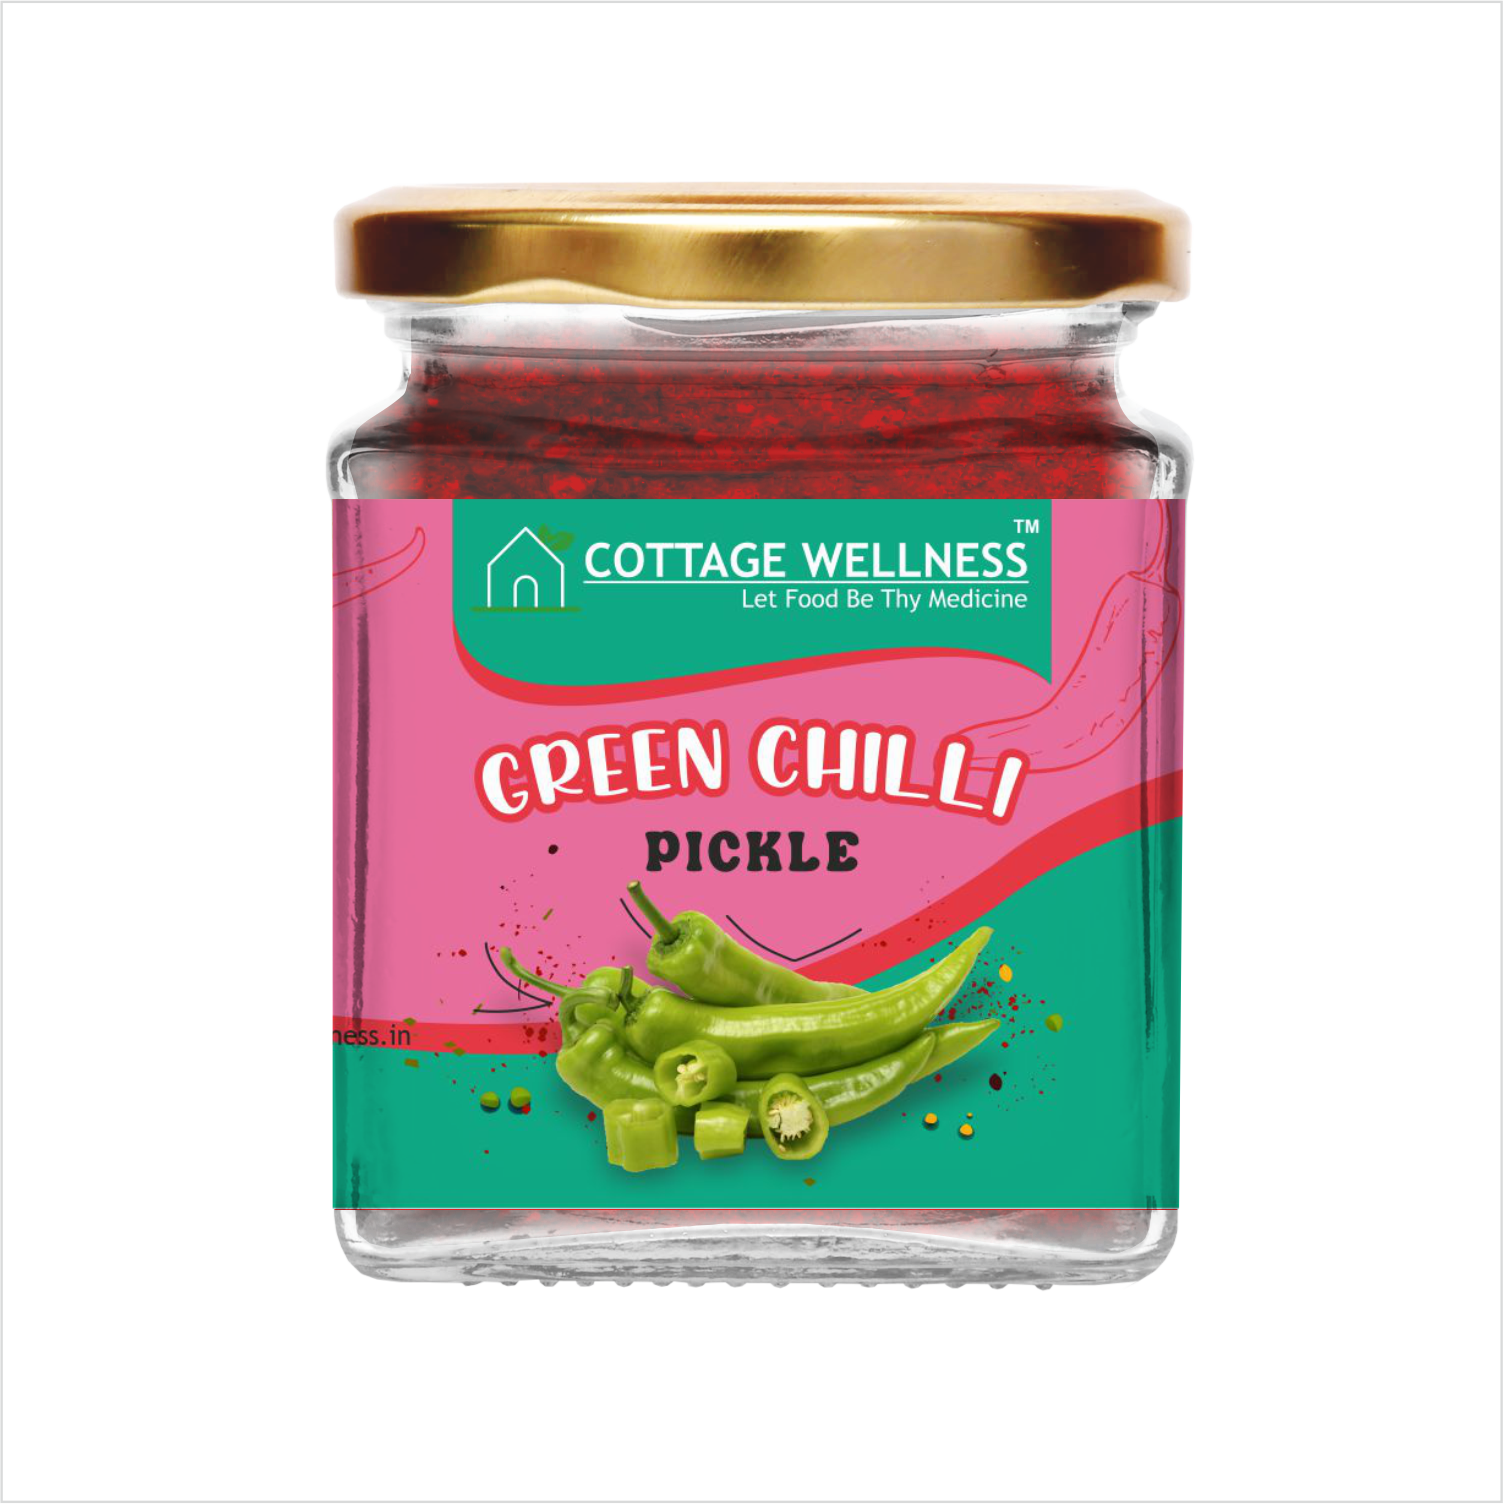 Cottage Wellness Home made Green Chilli Pickle 250gm - hfnl!fe